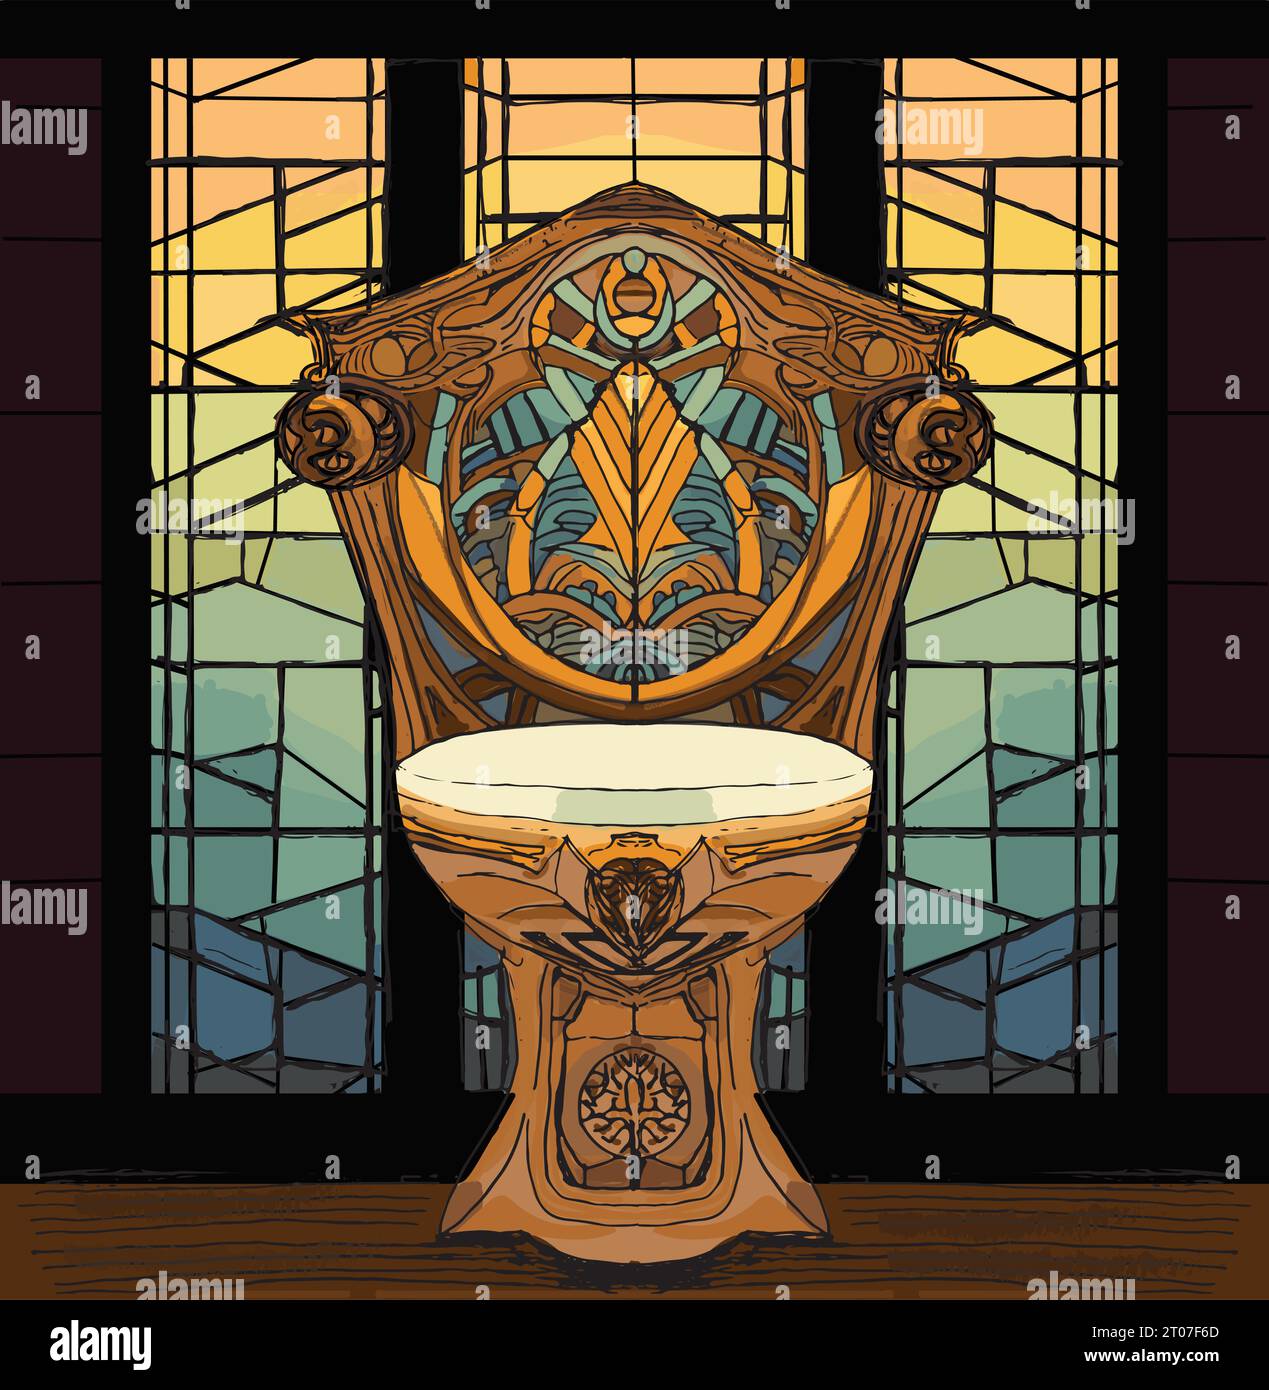 Stained glass illustration of an art nouveau style bathroom, toilet with glass window behind Stock Vector